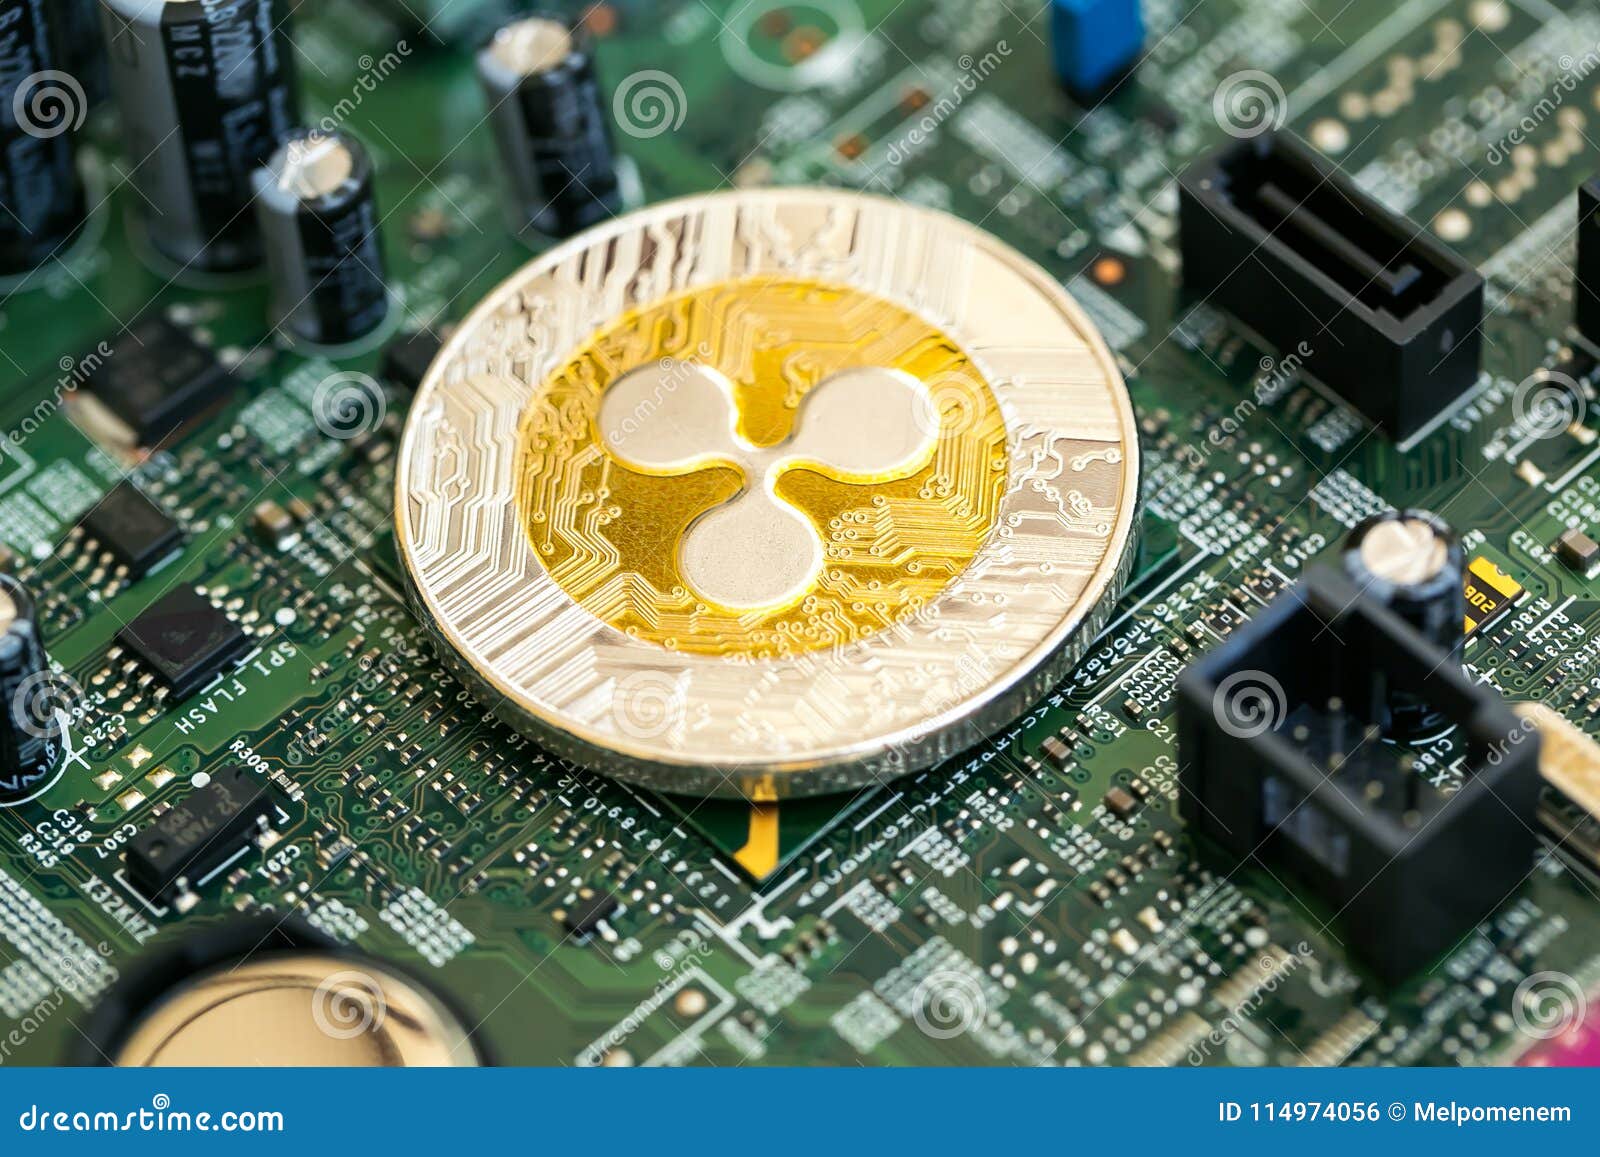 Ripple cryptocurrency coin stock photo. Image of market ...